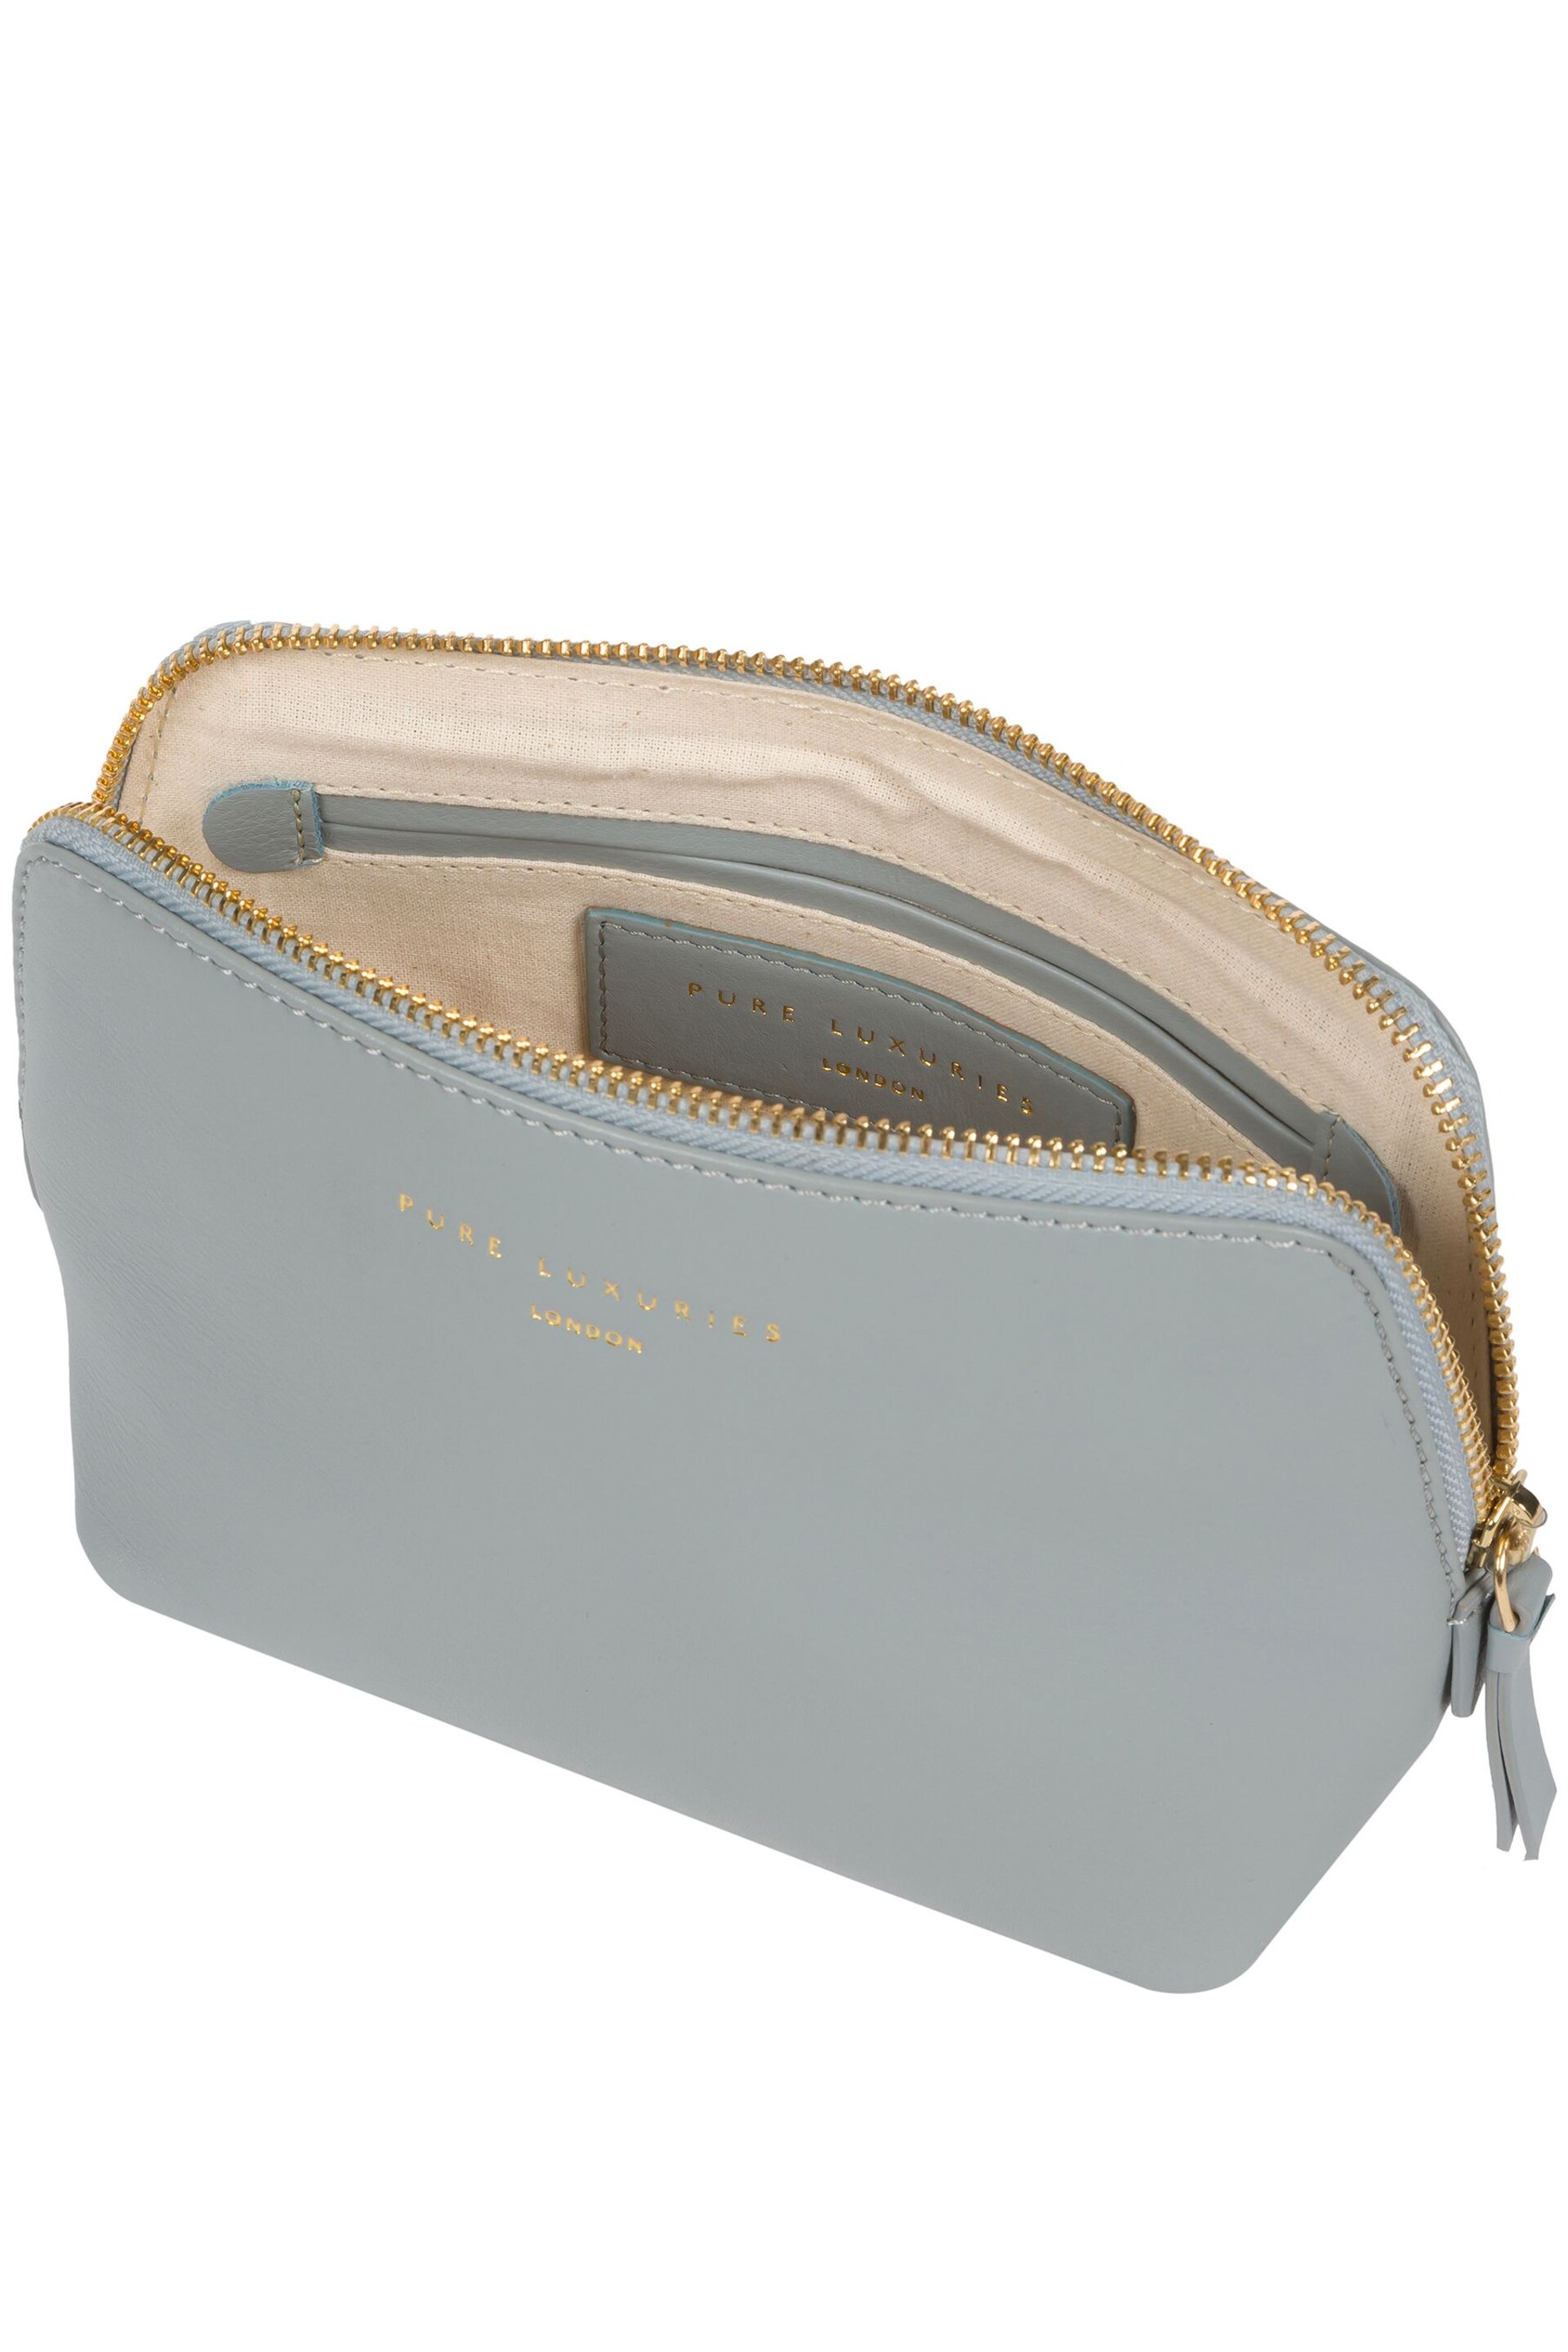 Pure Luxuries London Theydon Leather Cosmetic Bag - Image 3 of 5